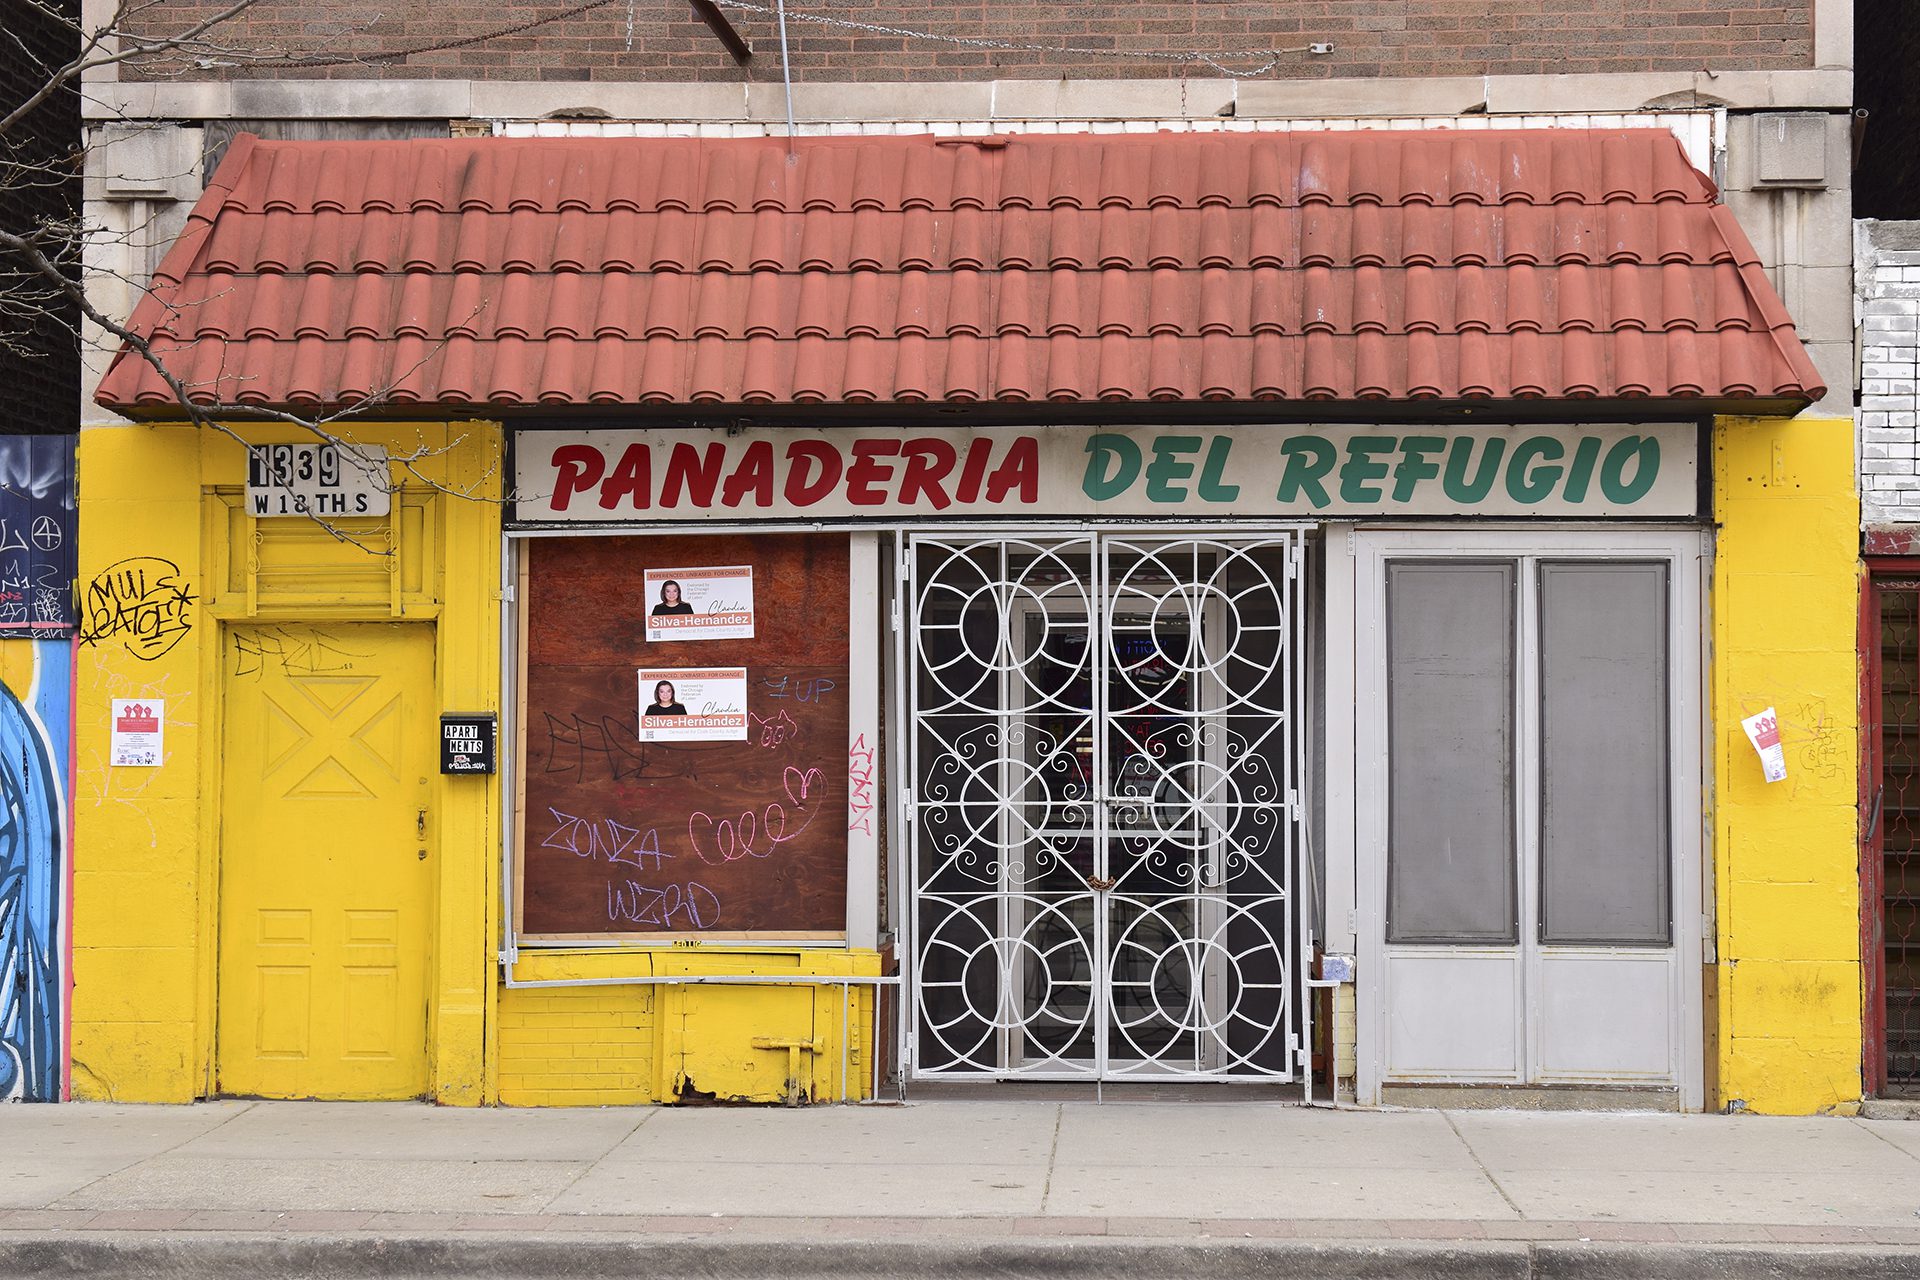 building of panaderia del refugio with white and yellow paint and shuttered, some graffiti